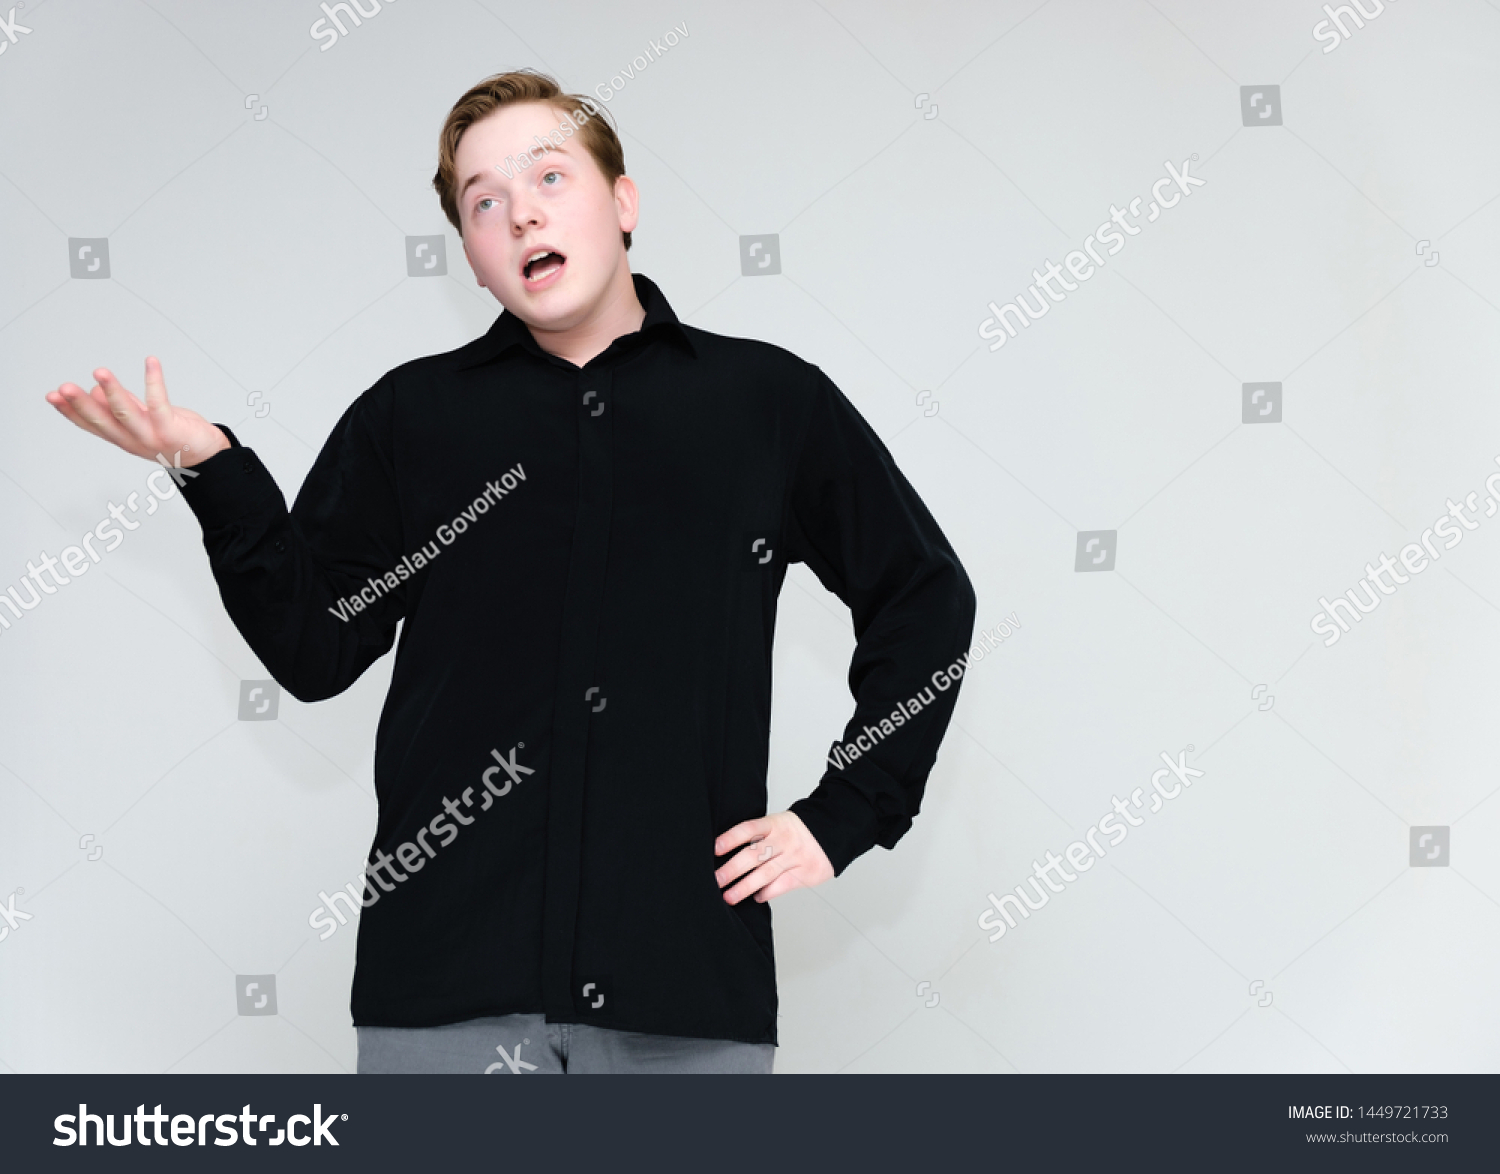 Portrait to the waist on a white background of a handsome young man in a black shirt. stands directly in front of the camera in different poses, talking, showing emotions, showing hands. #1449721733